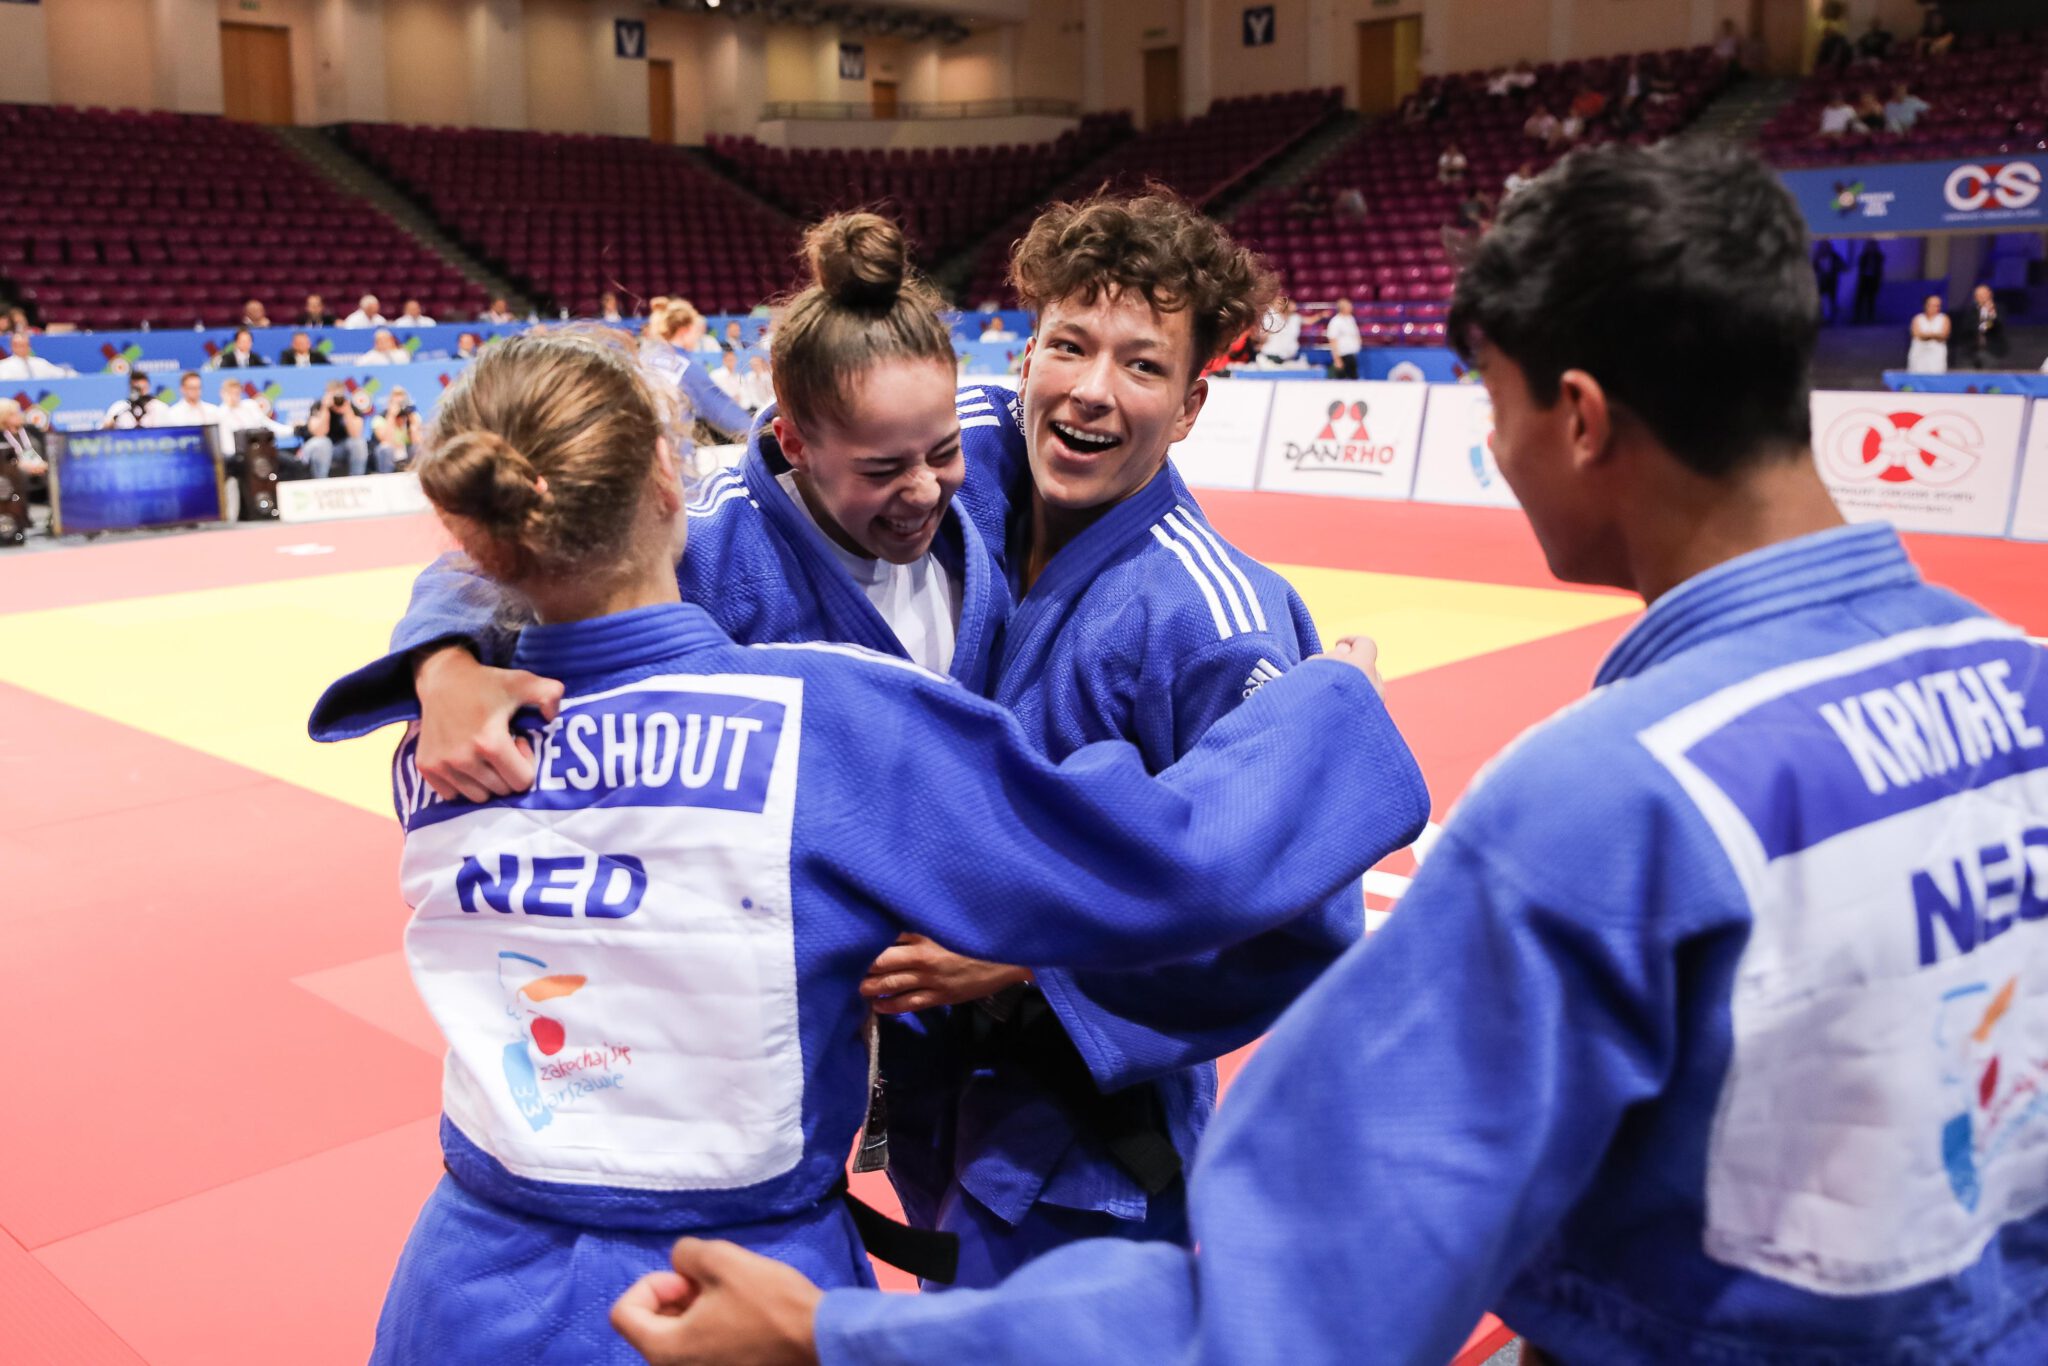 RETURN TO COMPETITION FOR CADETS AND JUNIORS FOLLOWING SENIOR WORLD CHAMPIONSHIPS